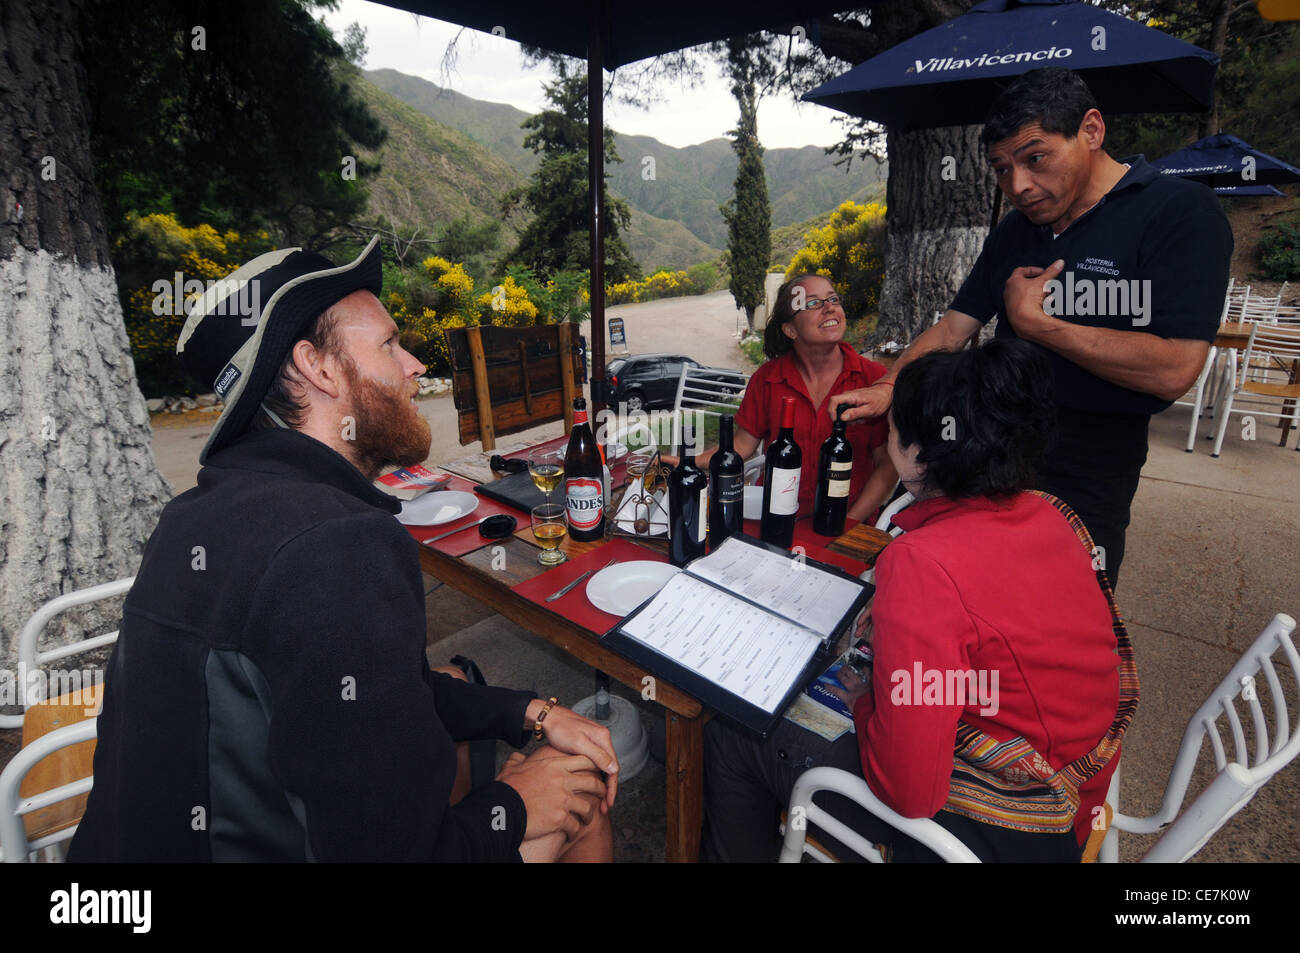 Waiter and tourists discussing the wine and food menu at Villavicencio, Argentina. No MR or PR Stock Photo